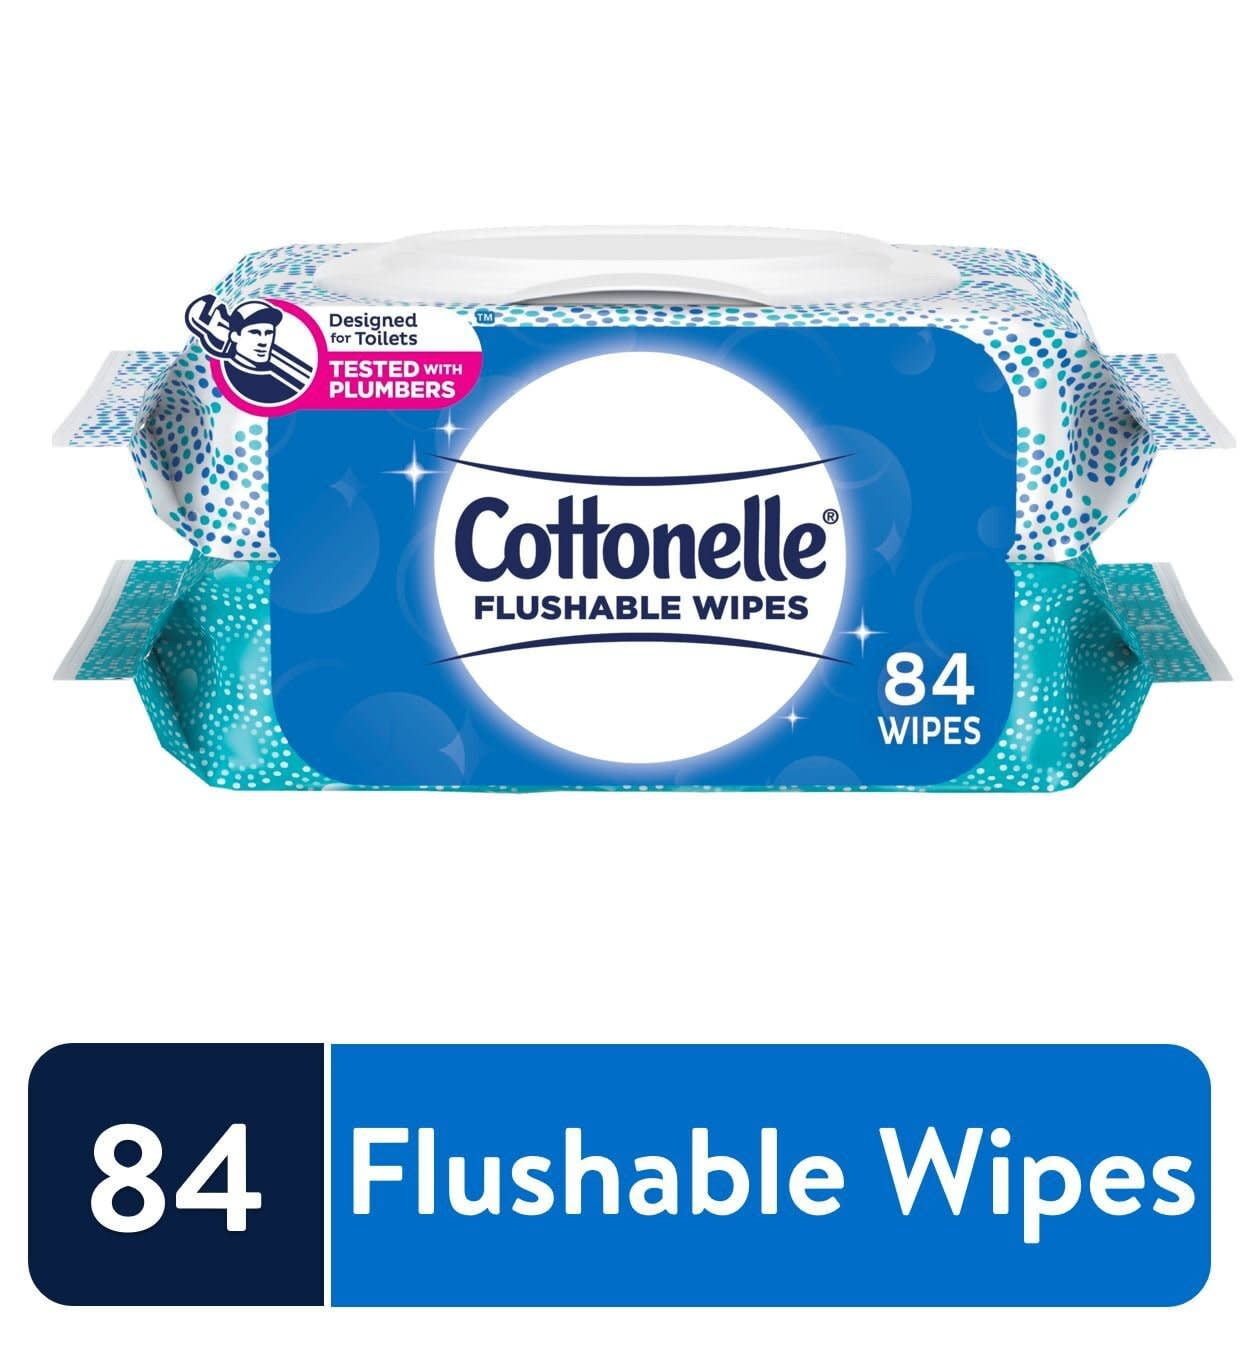 96 Pro Care Personal Wipes Adult Disposable Washcloth Large 8x12 by ArmyT41